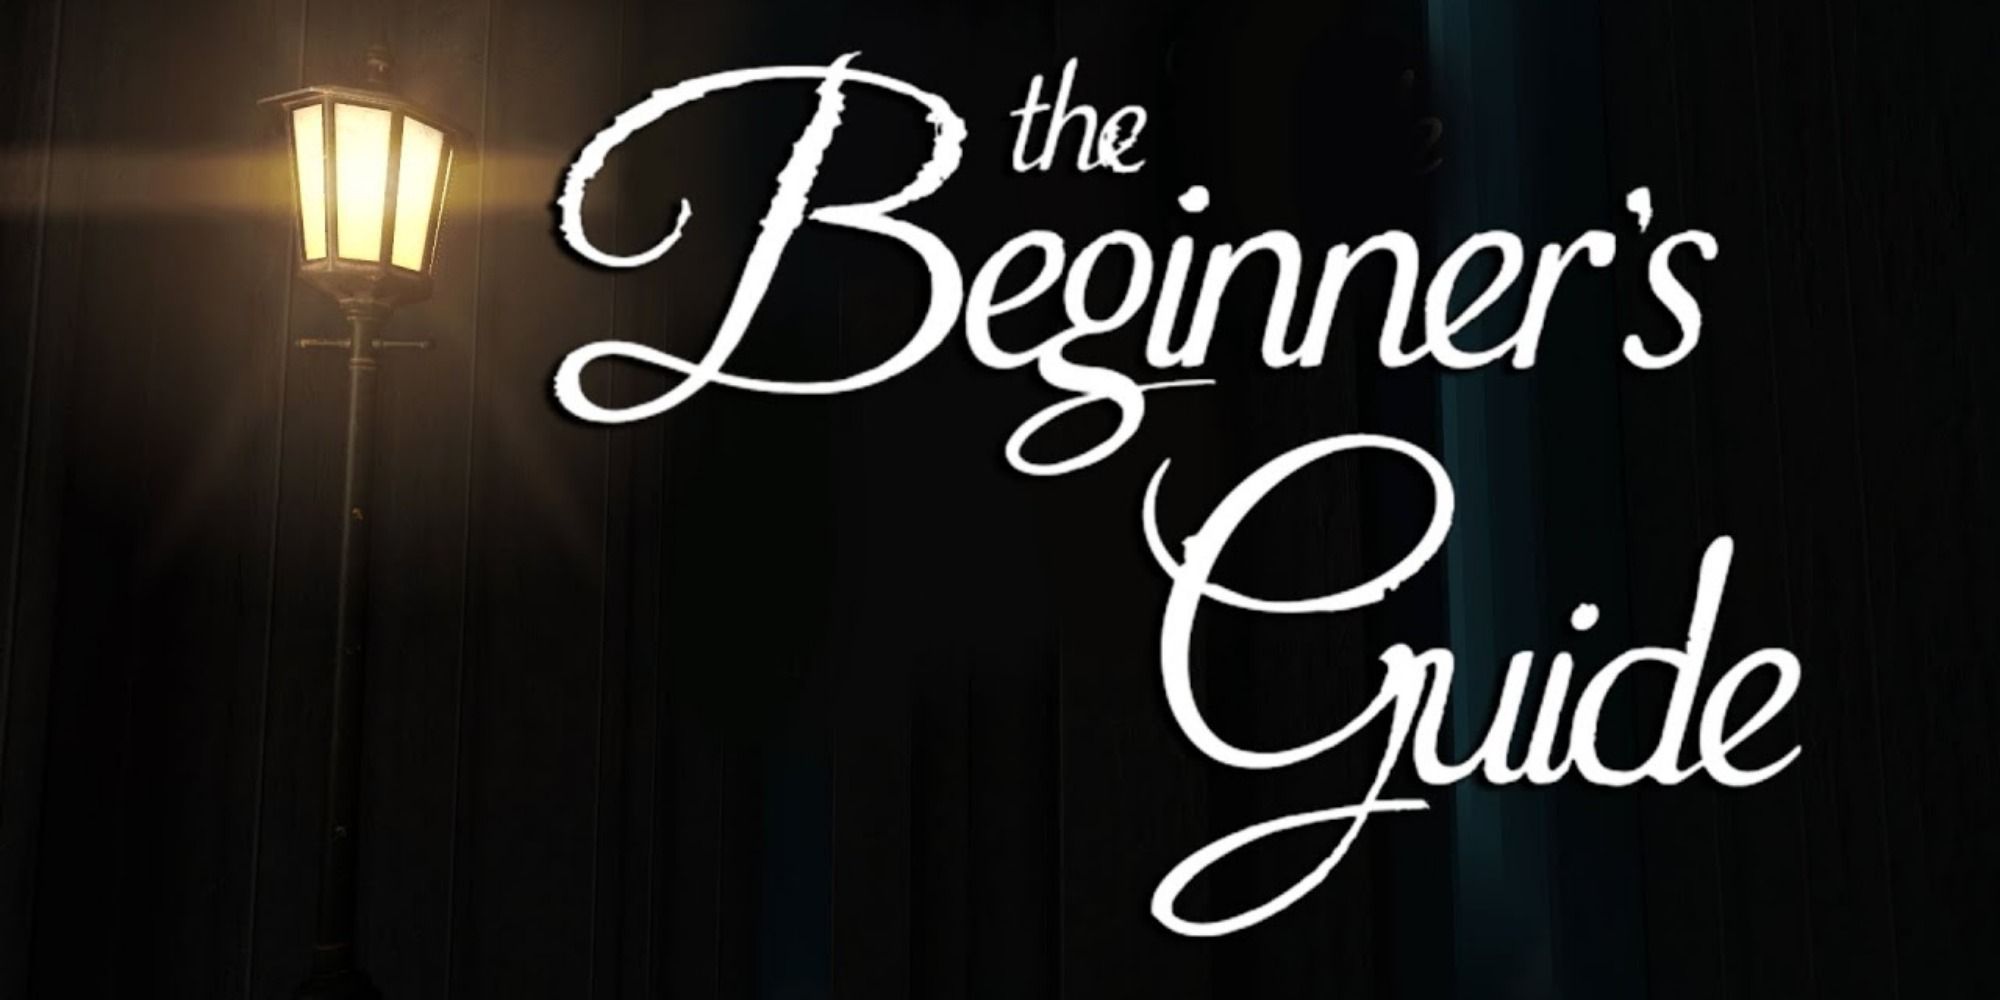 A lantern shines on a dark background with "The Beginner's Guide" title art to the right